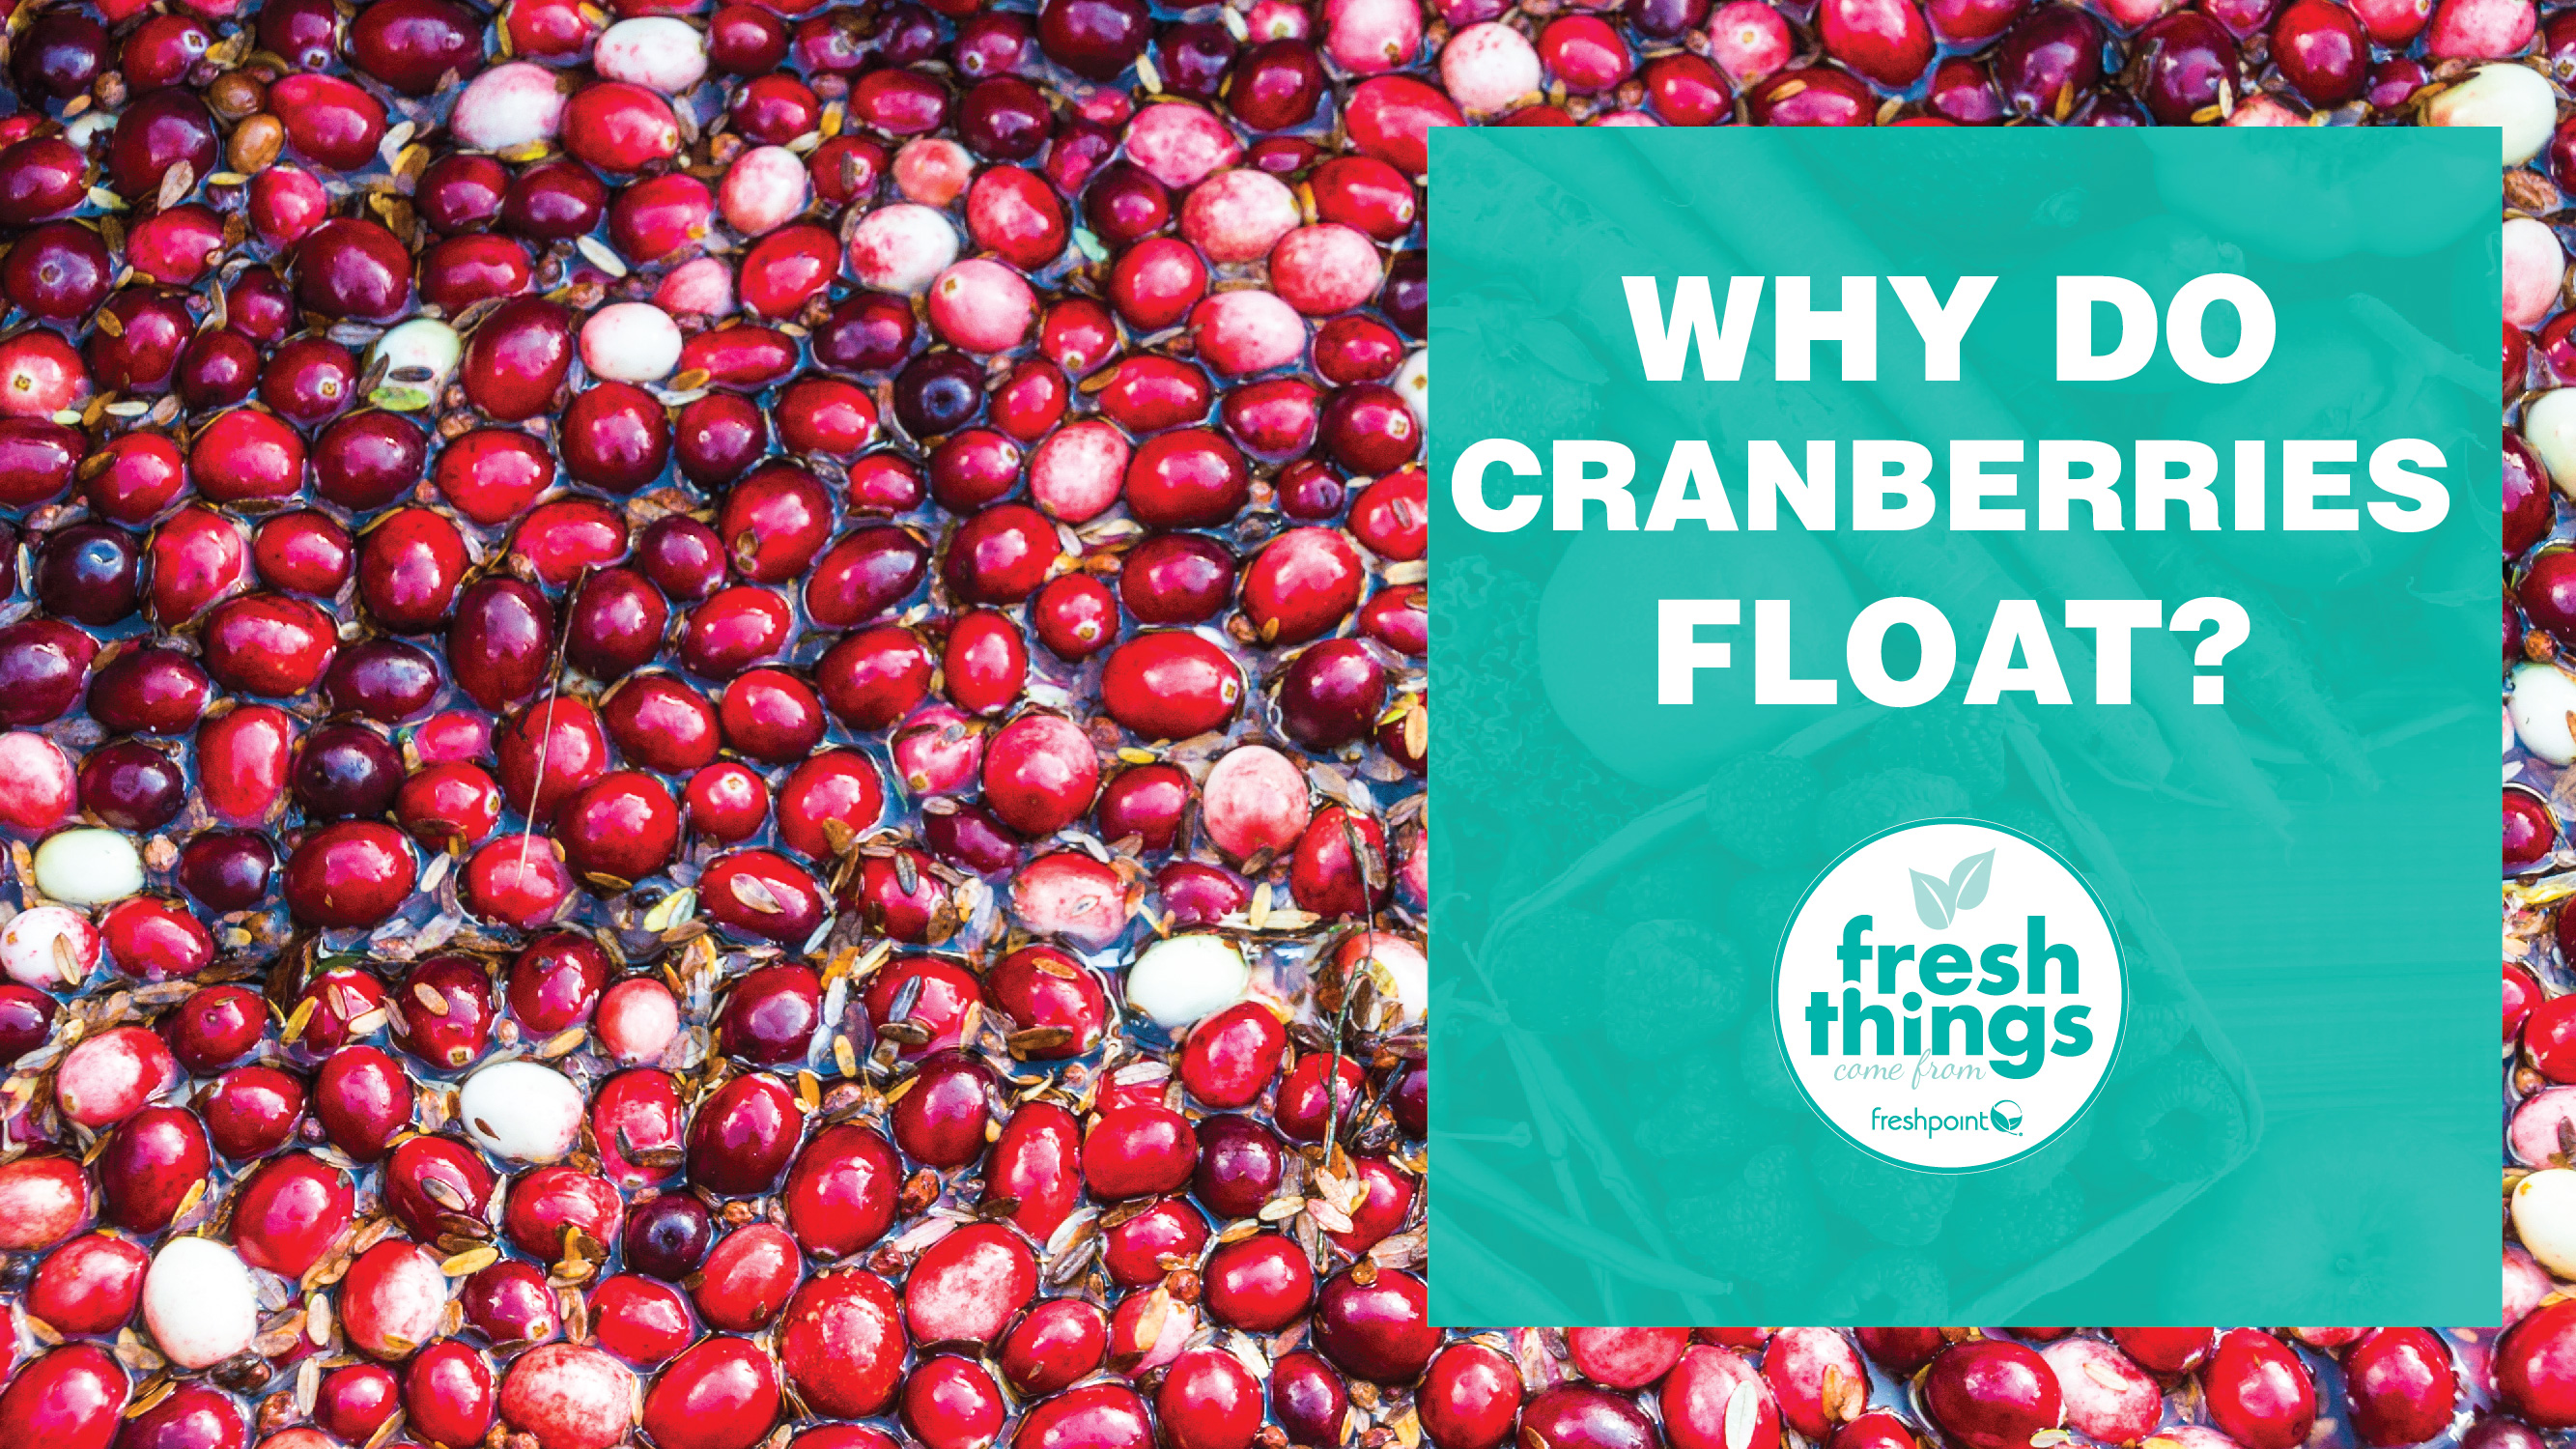 Freshpoint-produce-why-do-cranberries-float